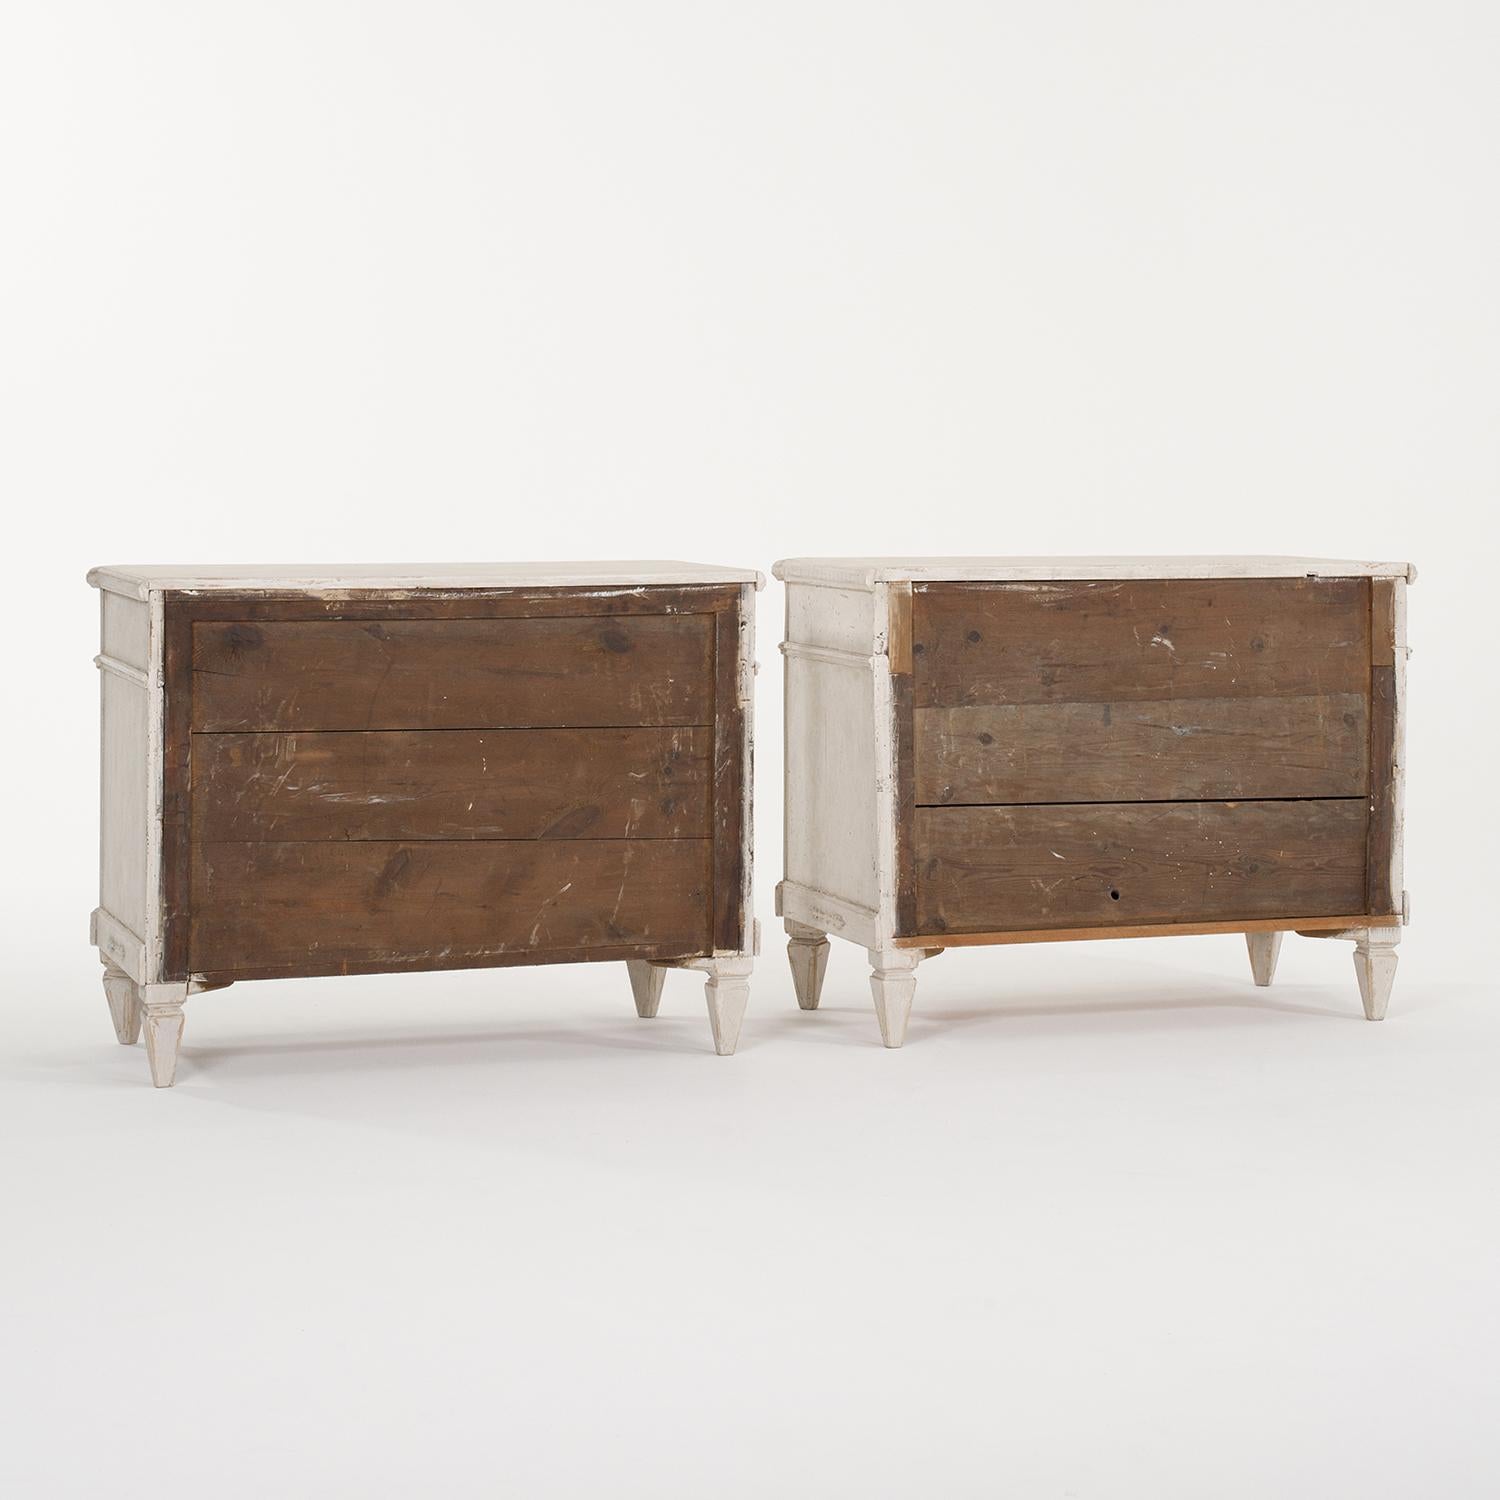 19th Century Swedish Gustavian Pair of Pinewood Chests - Antique Commodes For Sale 1